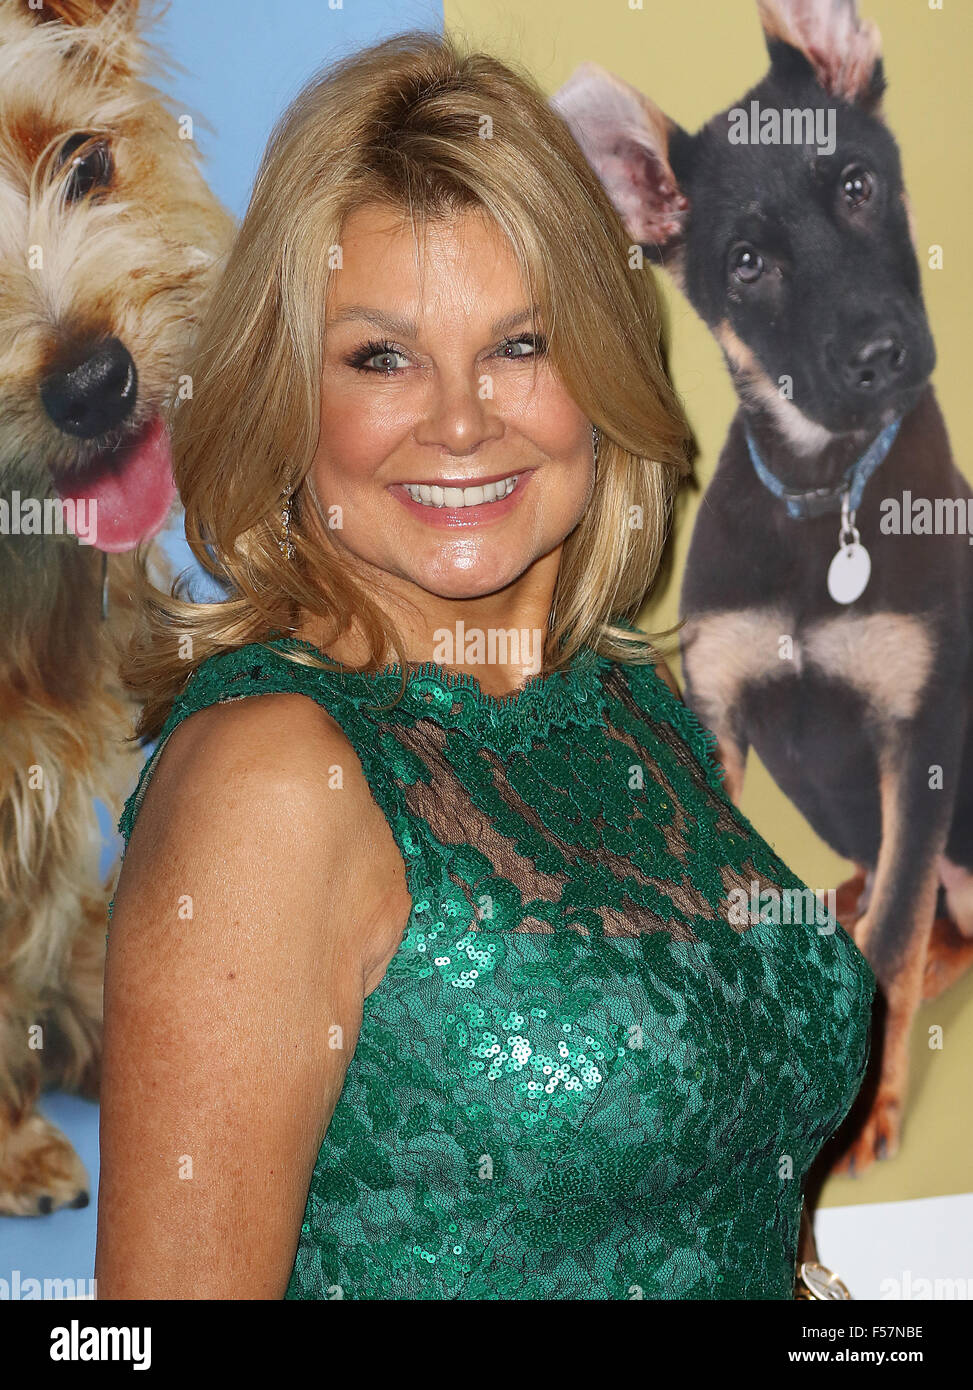 October 21, 2015 - Jilly Johnson attending the 'Daily Mirror & RSPCA Animal Hero Awards 2015' at 8 Northumberland Avenue in Lond Stock Photo